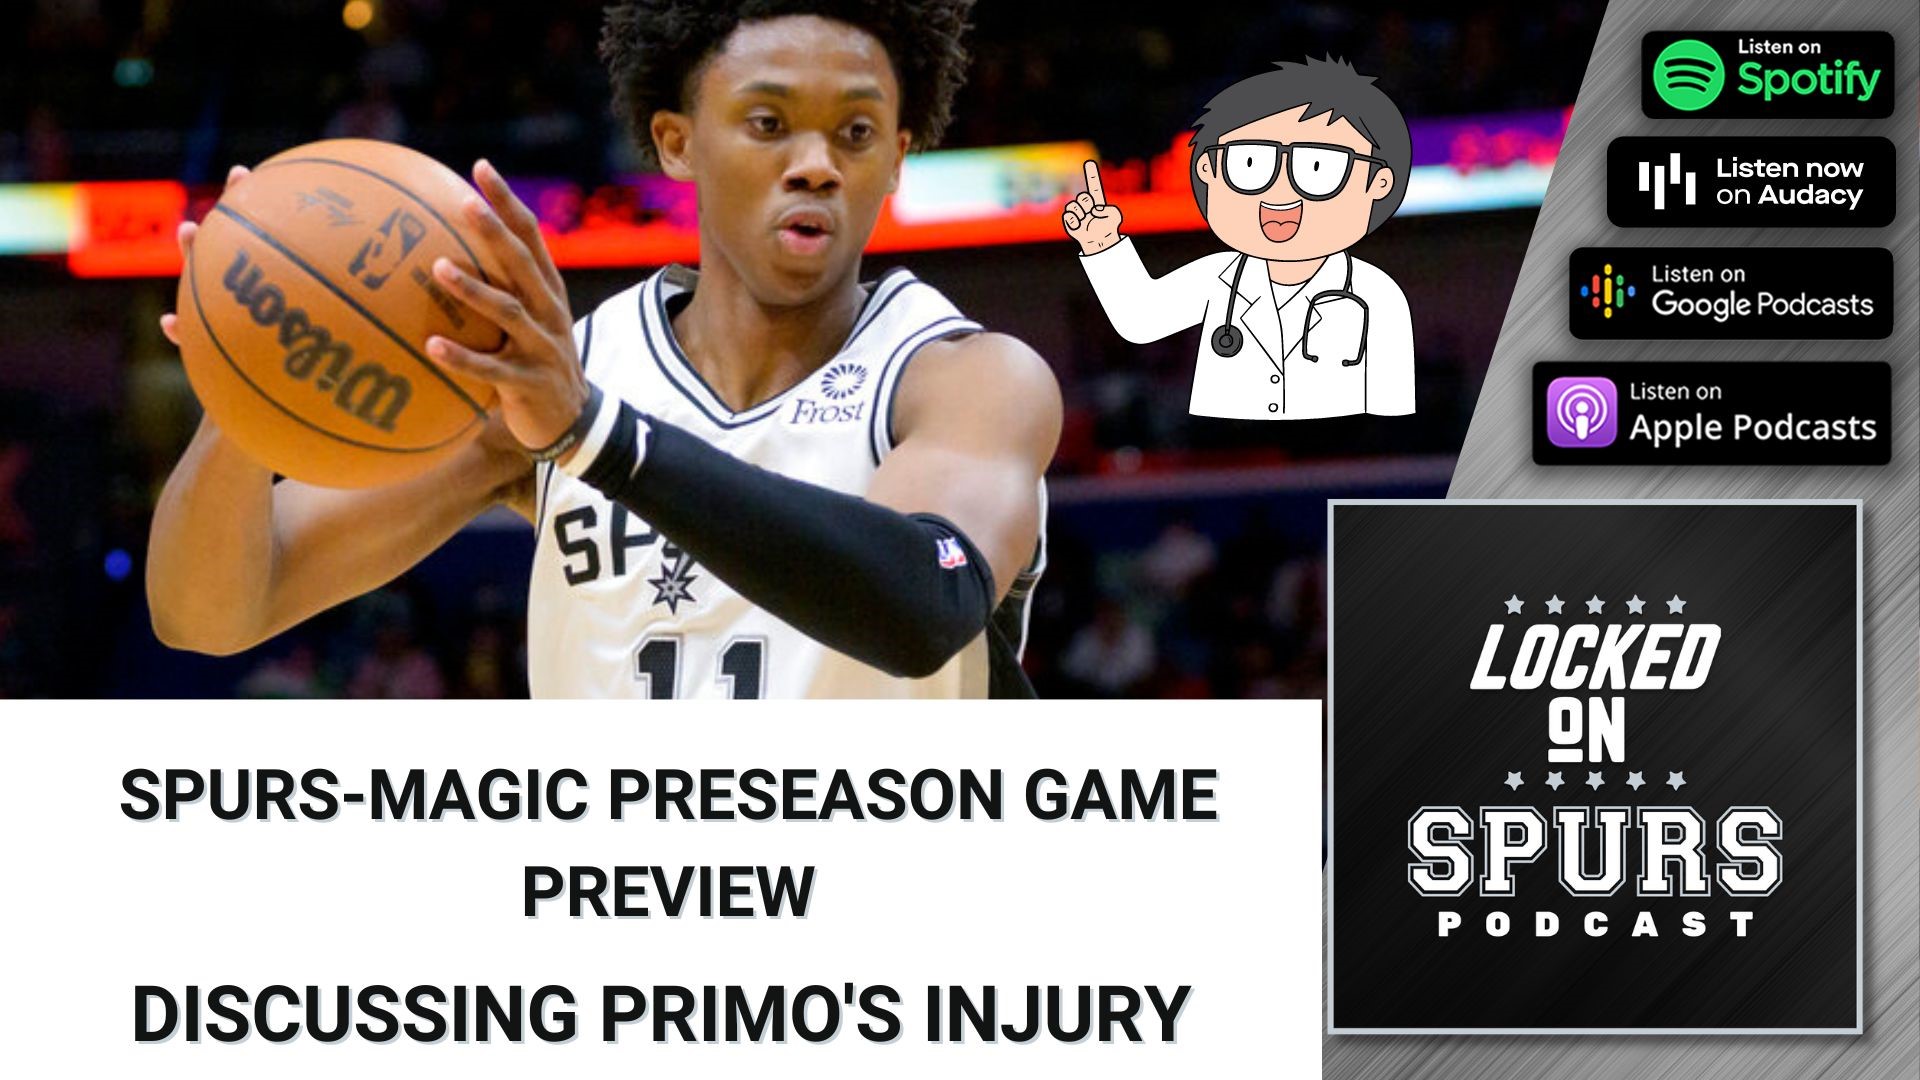 Let's talk about Primo's knee injury.